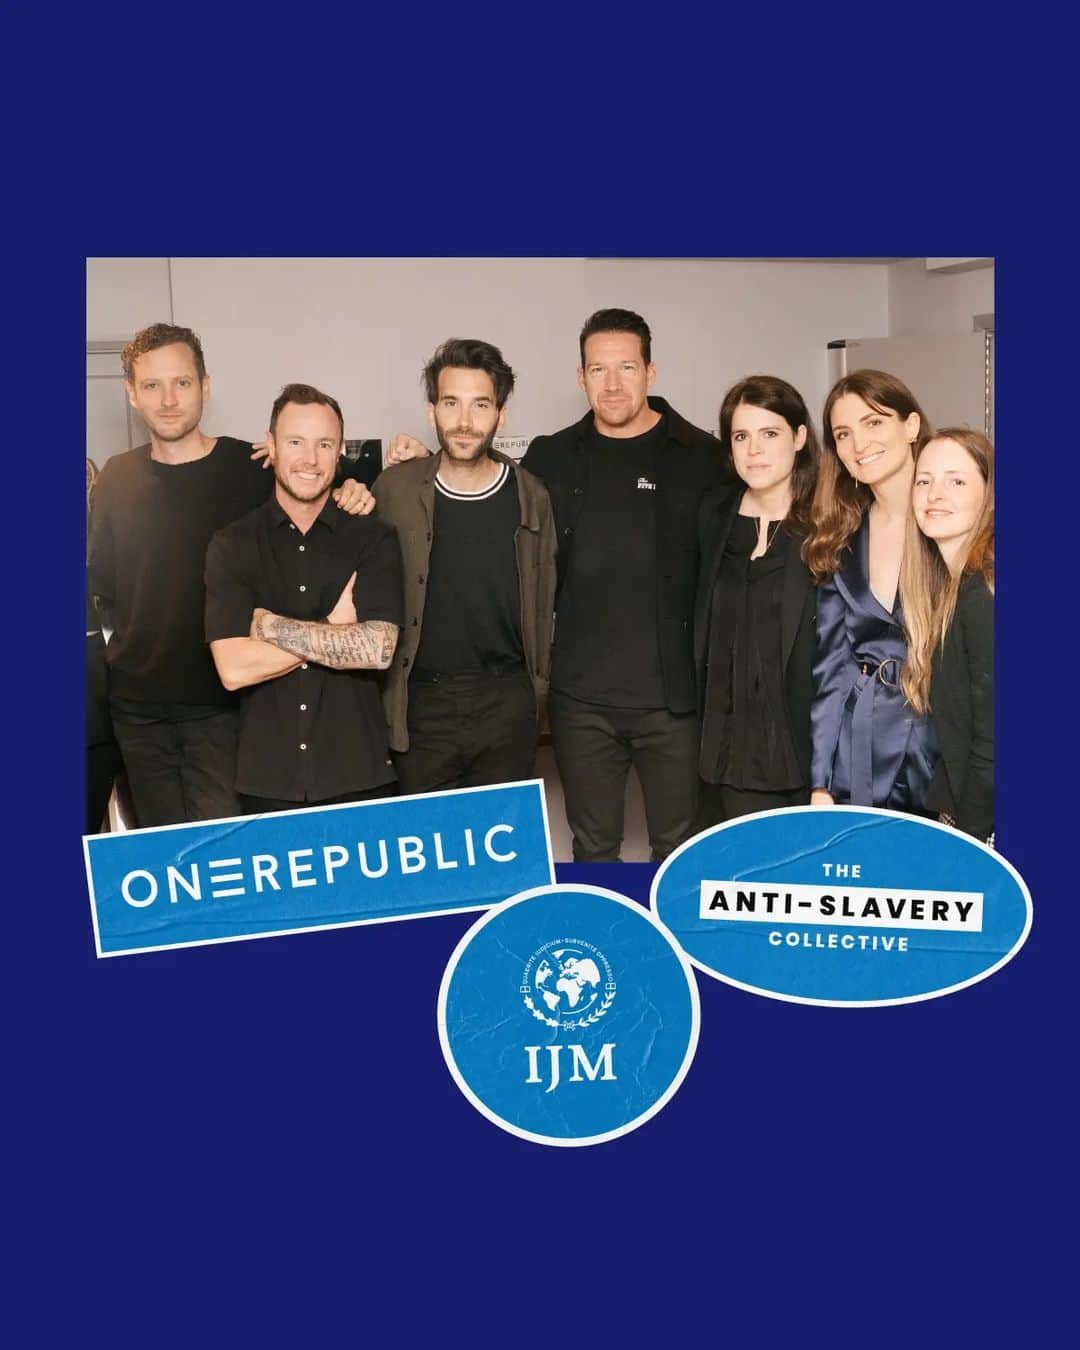 OneRepublicのインスタグラム：「Everyone deserves to live in freedom. That’s why OneRepublic stands with IJM to end slavery and human trafficking ✖️  Ever since we visited @IJM’s work in the Philippines, we saw how slavery affects all of us, and how children as young as two months old are being exploited and are in desperate need of protection.  Slavery is still alive, and constantly evolving. This is why as a band we’re passionate advocates for IJM’s innovative, impactful work to bring freedom. We’ve partnered alongside them for many years, including raising awareness across tours in the US, UK and Europe, and we’ve loved inviting others to join the movement 🎤  @zachfilkins1r shared more about the band’s passion to use their voice to advocate for freedom in the recent ‘Floodlight’ podcast by ‘The Anti-Slavery Collective’ with @princesseugenie and @ijm_uk.   Listen to their inspiring conversation and learn why ending slavery requires all of us ✊🏽  Search ‘OneRepublic Floodlight’ wherever you get your podcasts or visit IJMUK.org/1R」